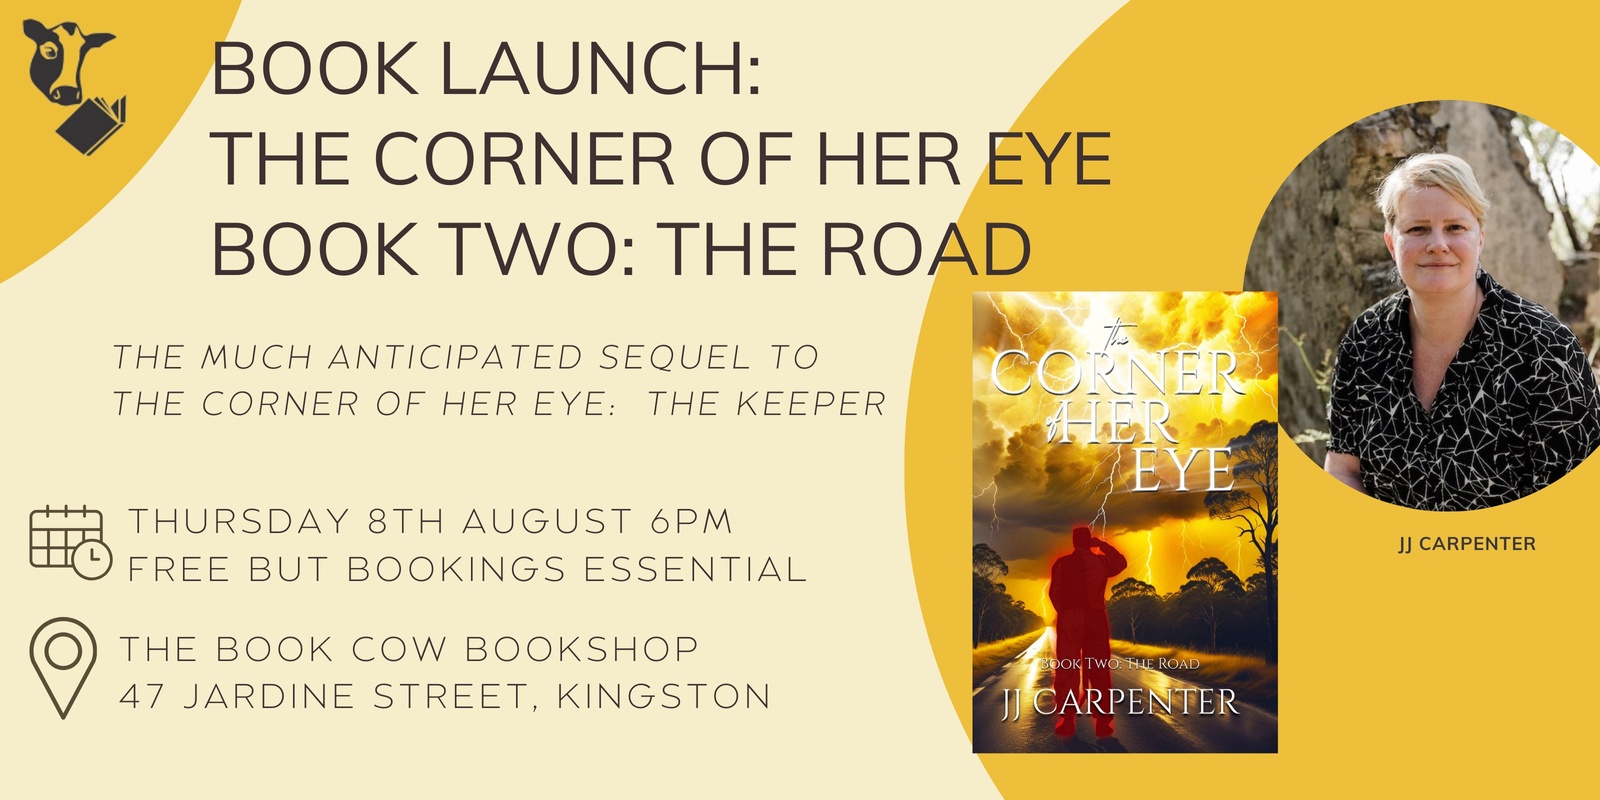 Banner image for Book Launch - The Corner of Her Eye Book Two: The Road by JJ Carpenter